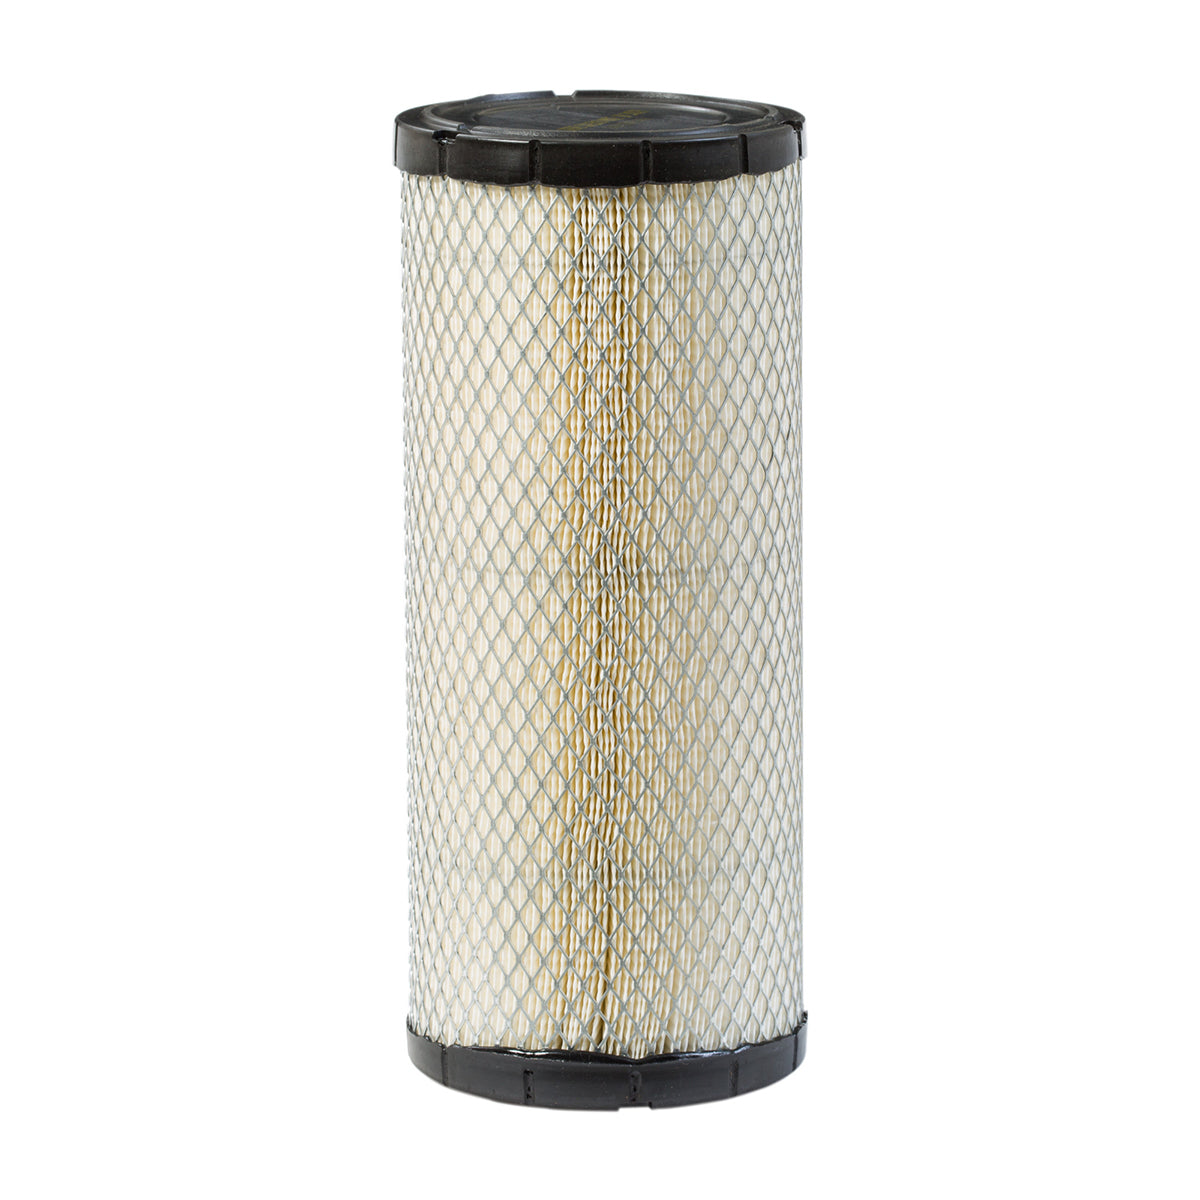 John Deere Air Filter, Primary for Select 5 Series Utility Tractors